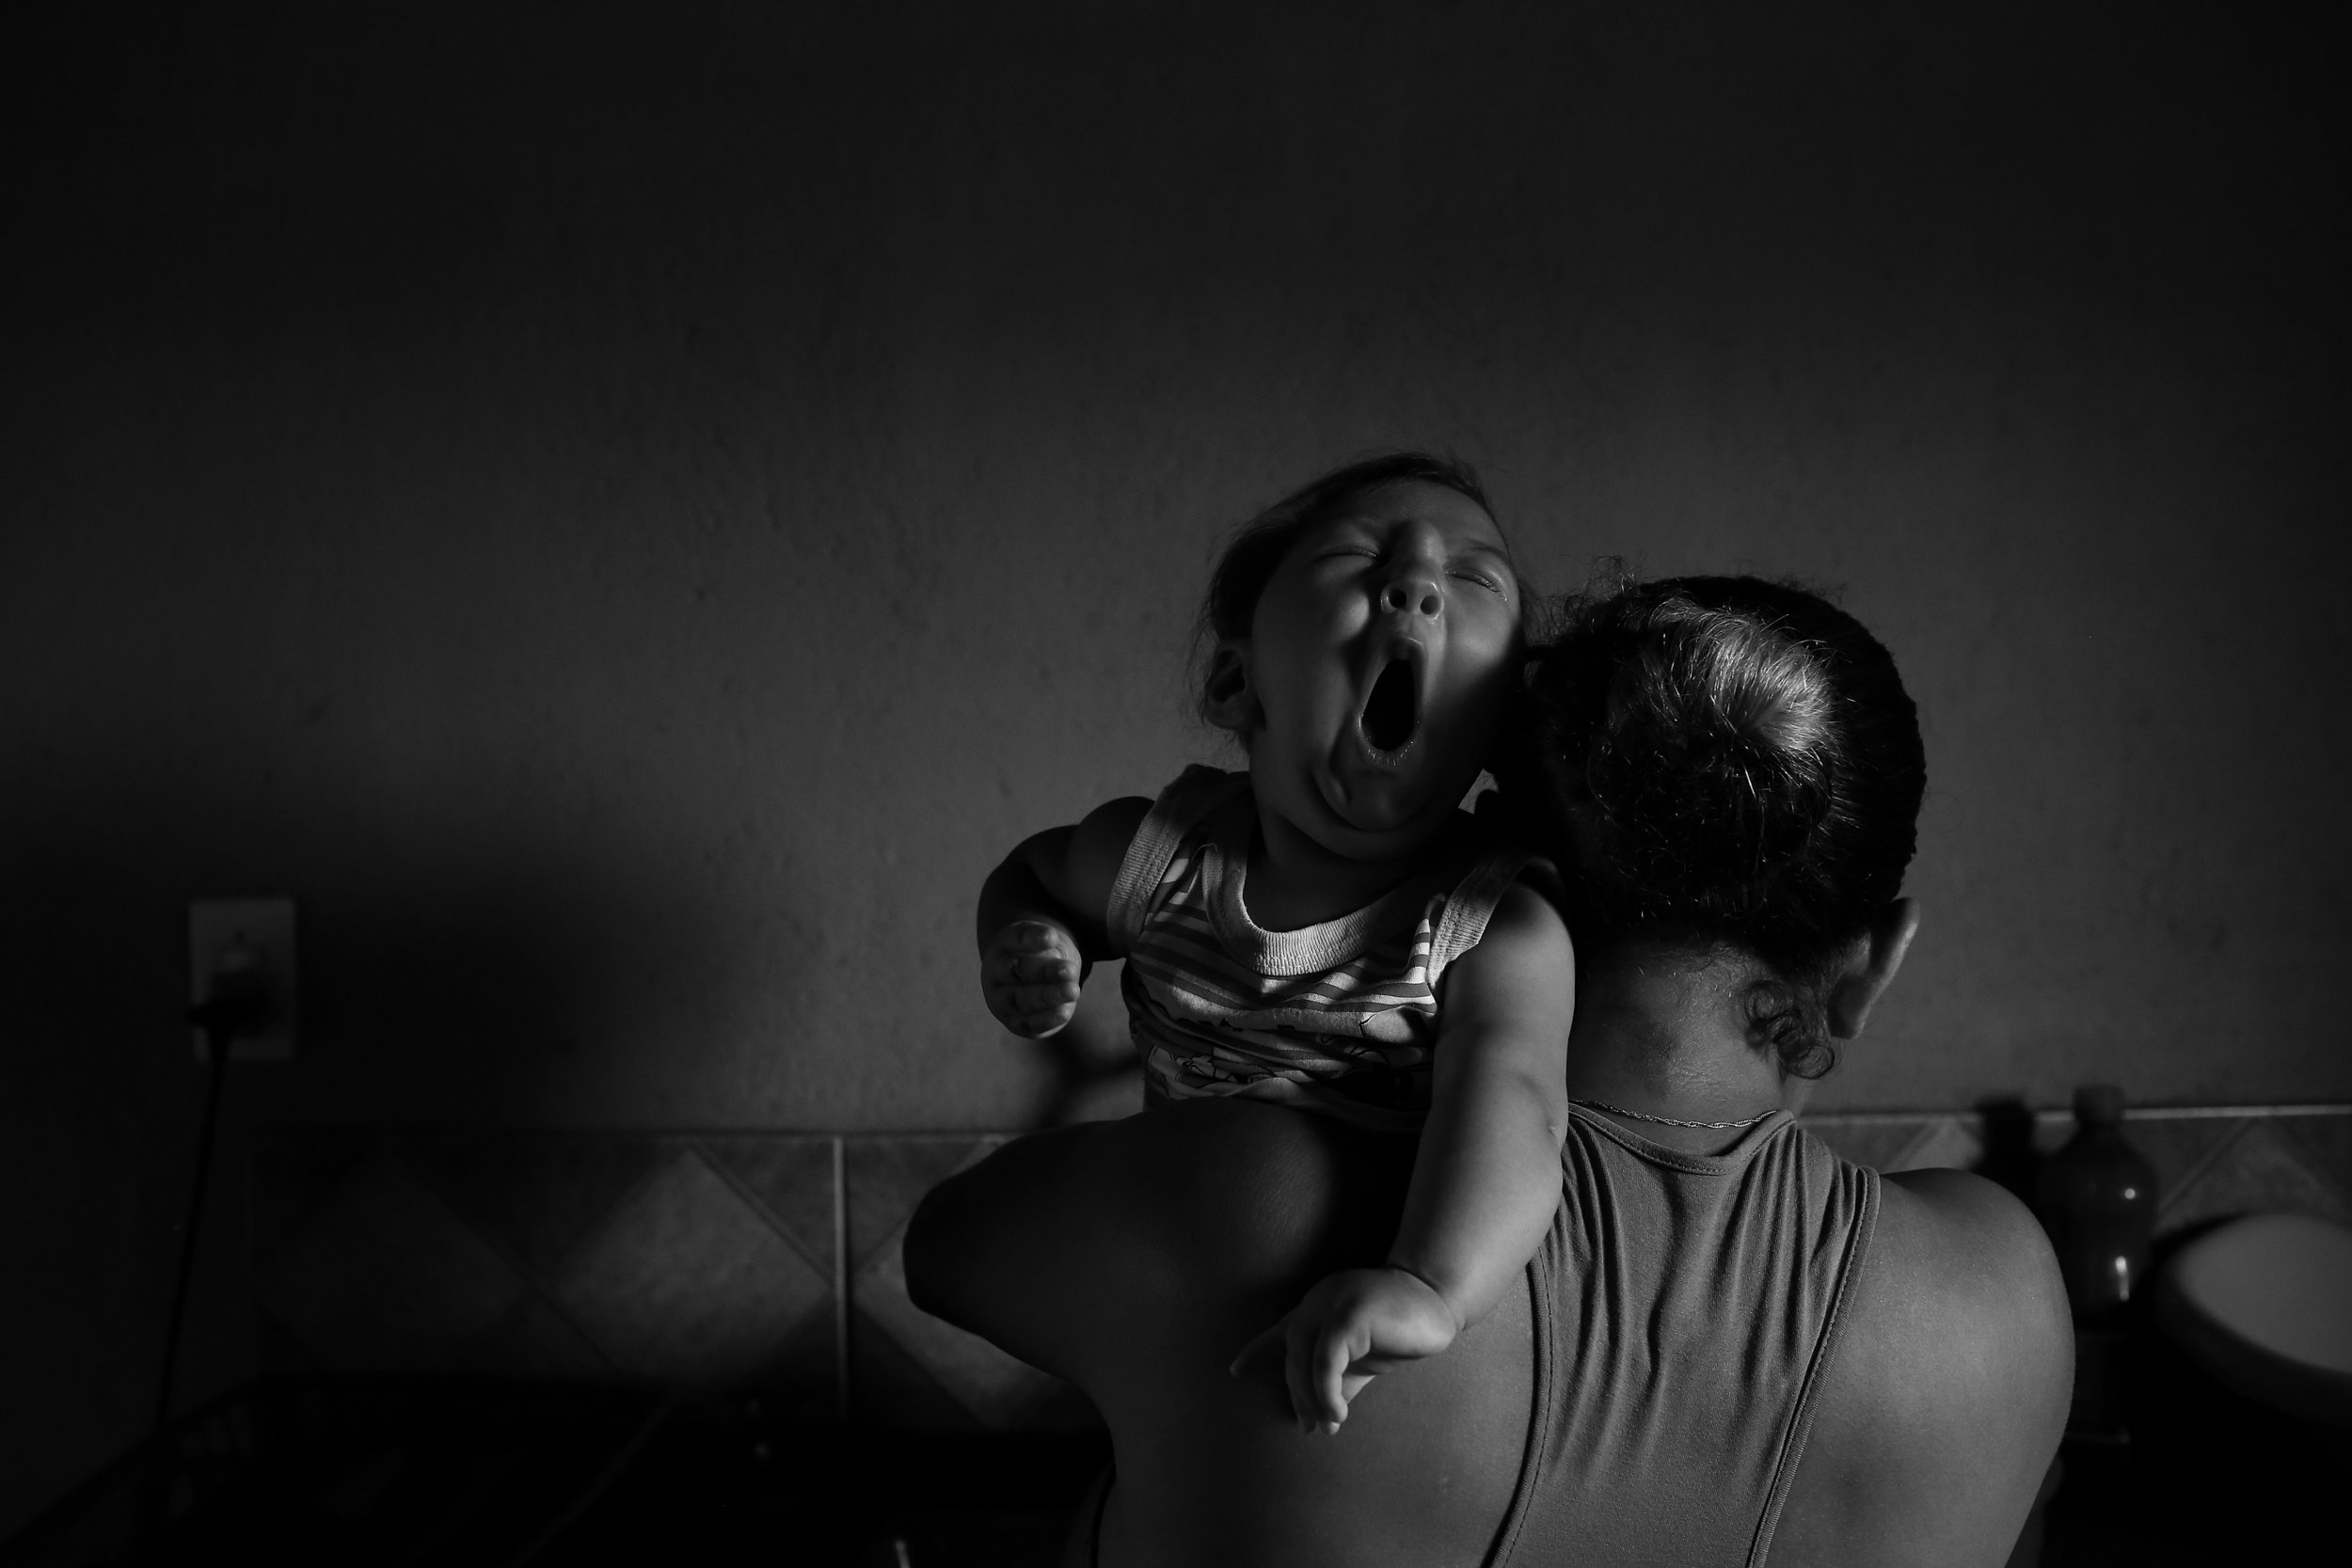  Juggling her tired son Gilberto, who was born with microcephaly, single mother Josemary Gomes, age 34, cleans dishes at her kitchen sink. Gilberto must constantly be held or he will start crying again; babies with microcephaly tend to be more easily